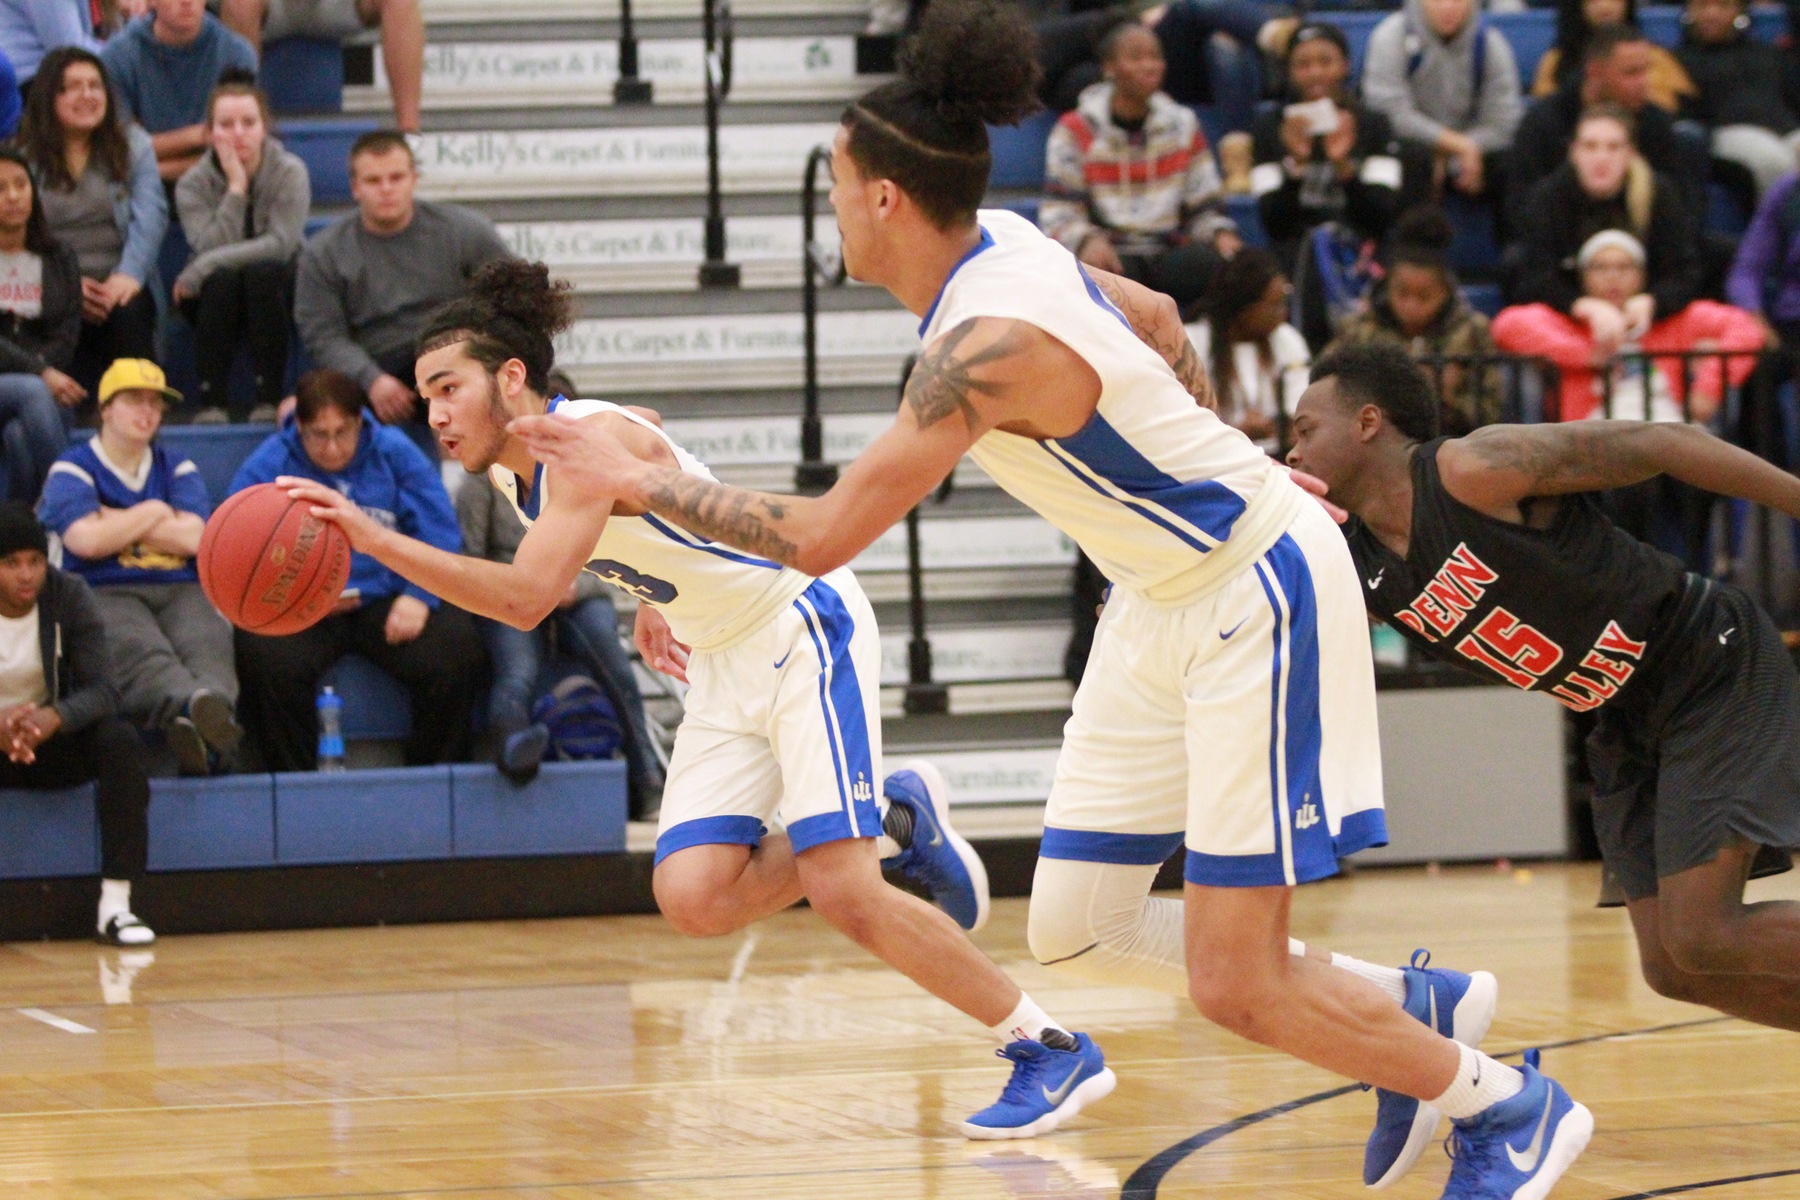 The duo of Pat Dembley (with ball) and Isaiah Wade (on right) combined for 43 of the Reivers 86 points Tuesday night (11/28). Wade also grabbed a team high 13 rebounds in the Reivers' 86-83 victory over Penn Valley.